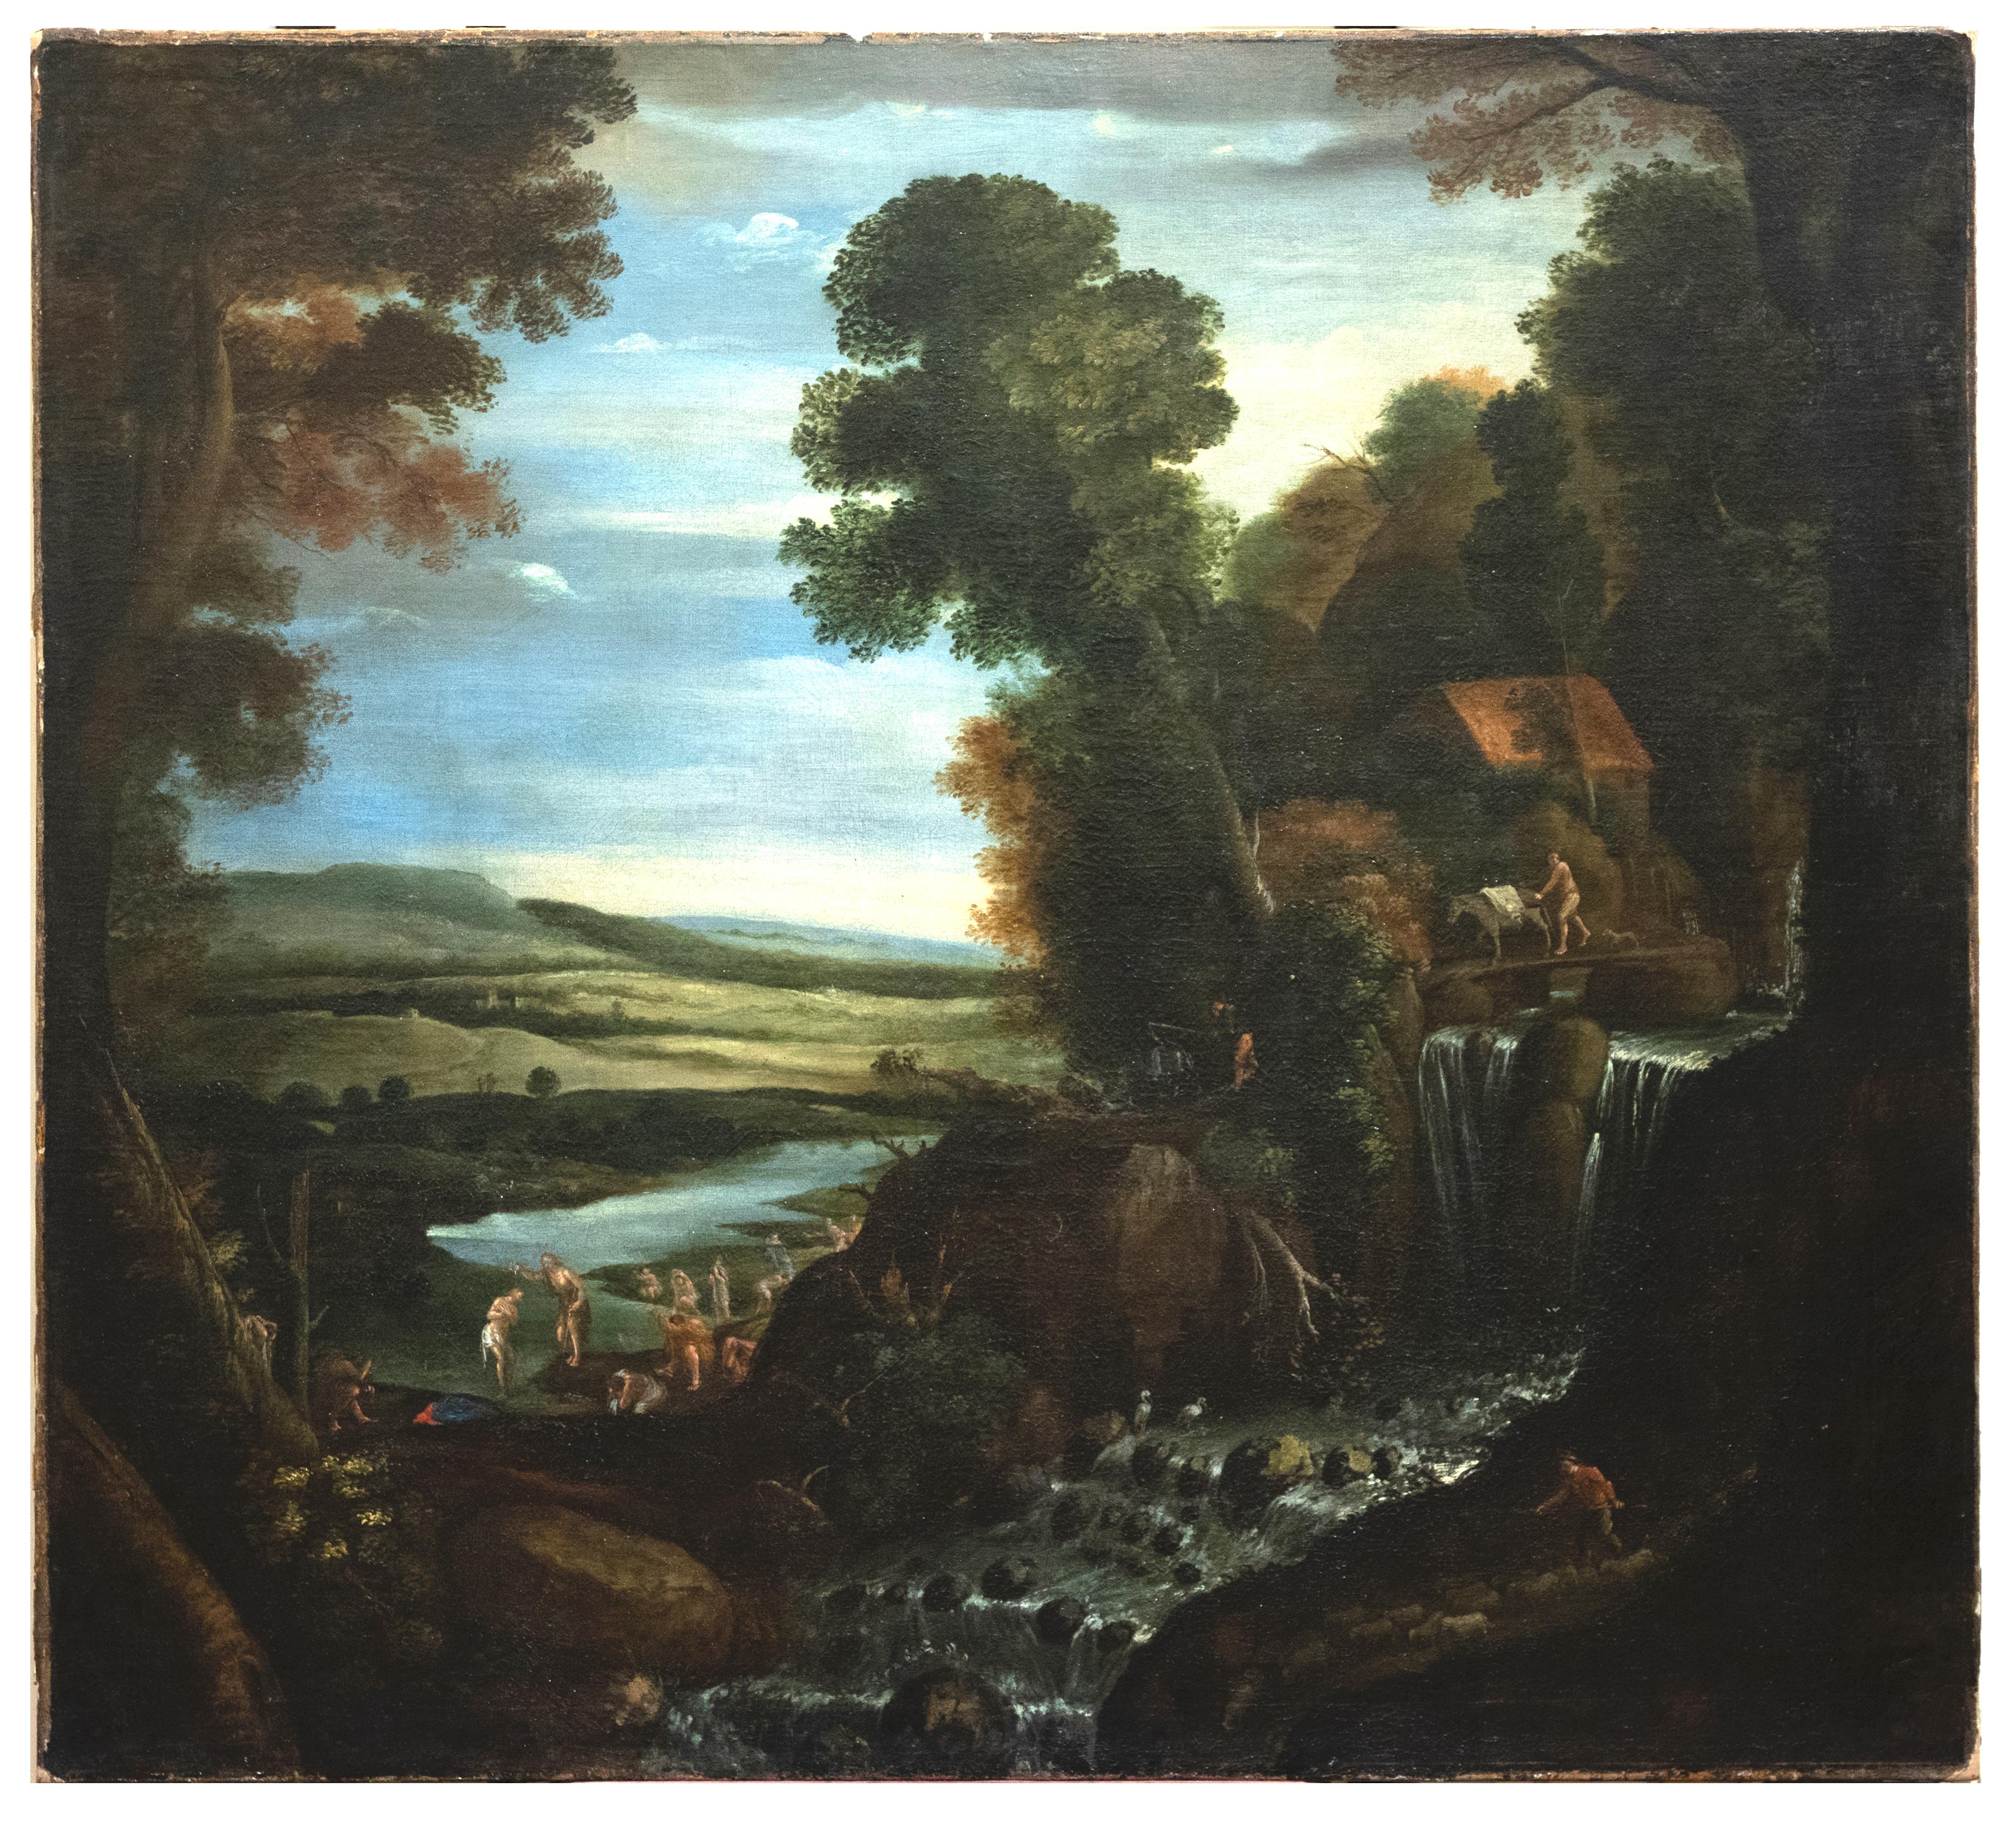 Matthijs Bril Figurative Painting - Landscape with Figures - Oil on Canvas - 1570 ca.